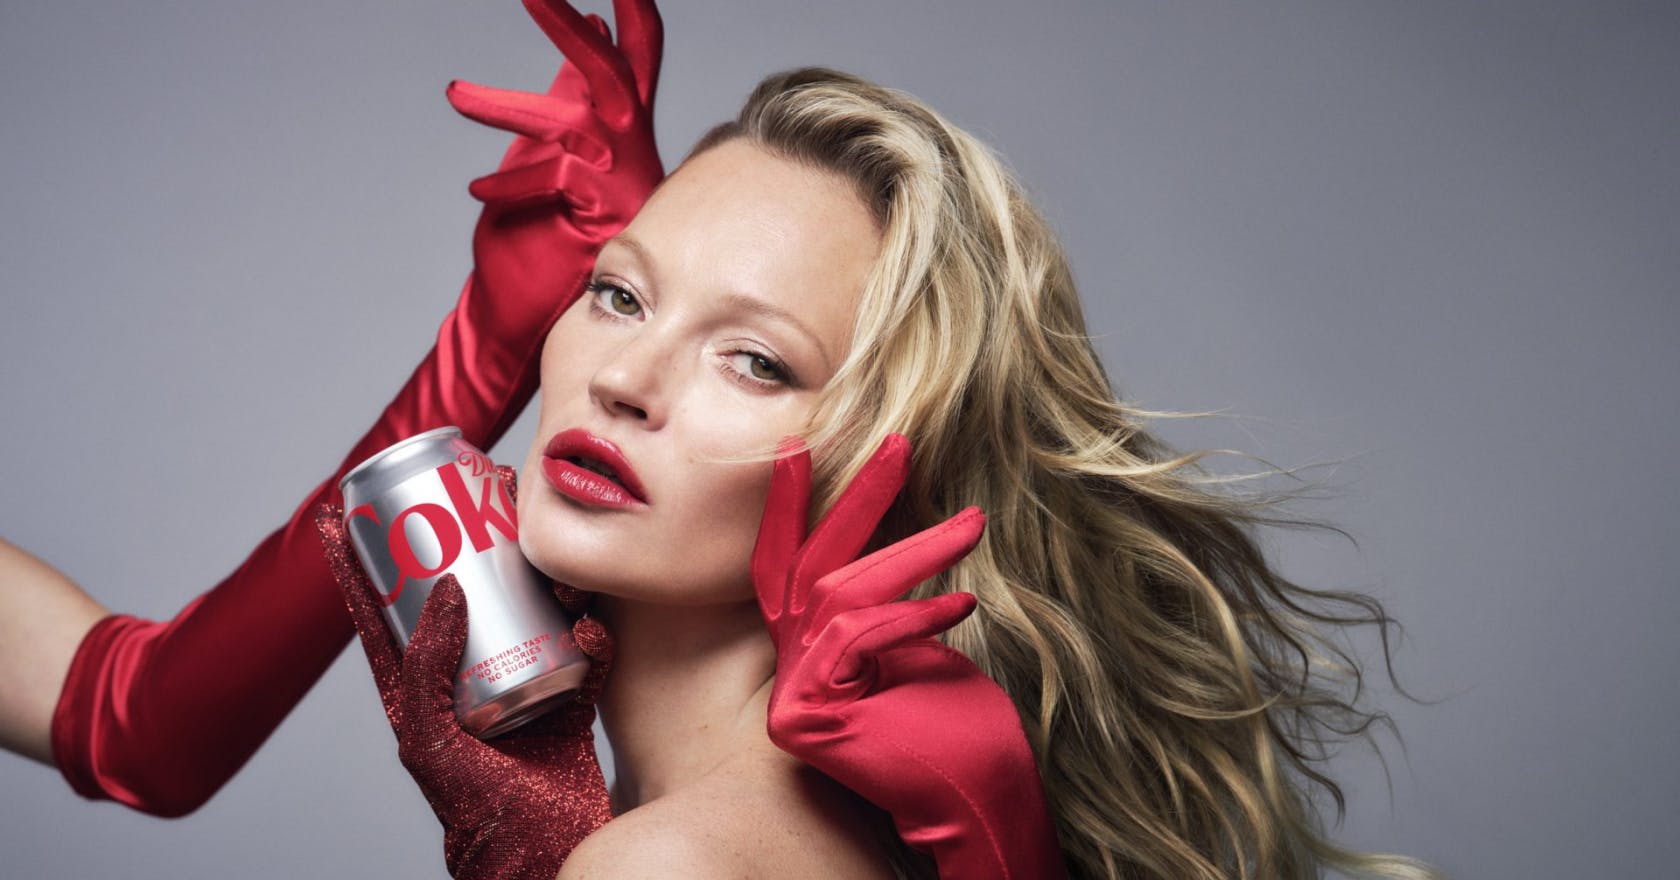 Kate Moss joins Diet Coke as creative director